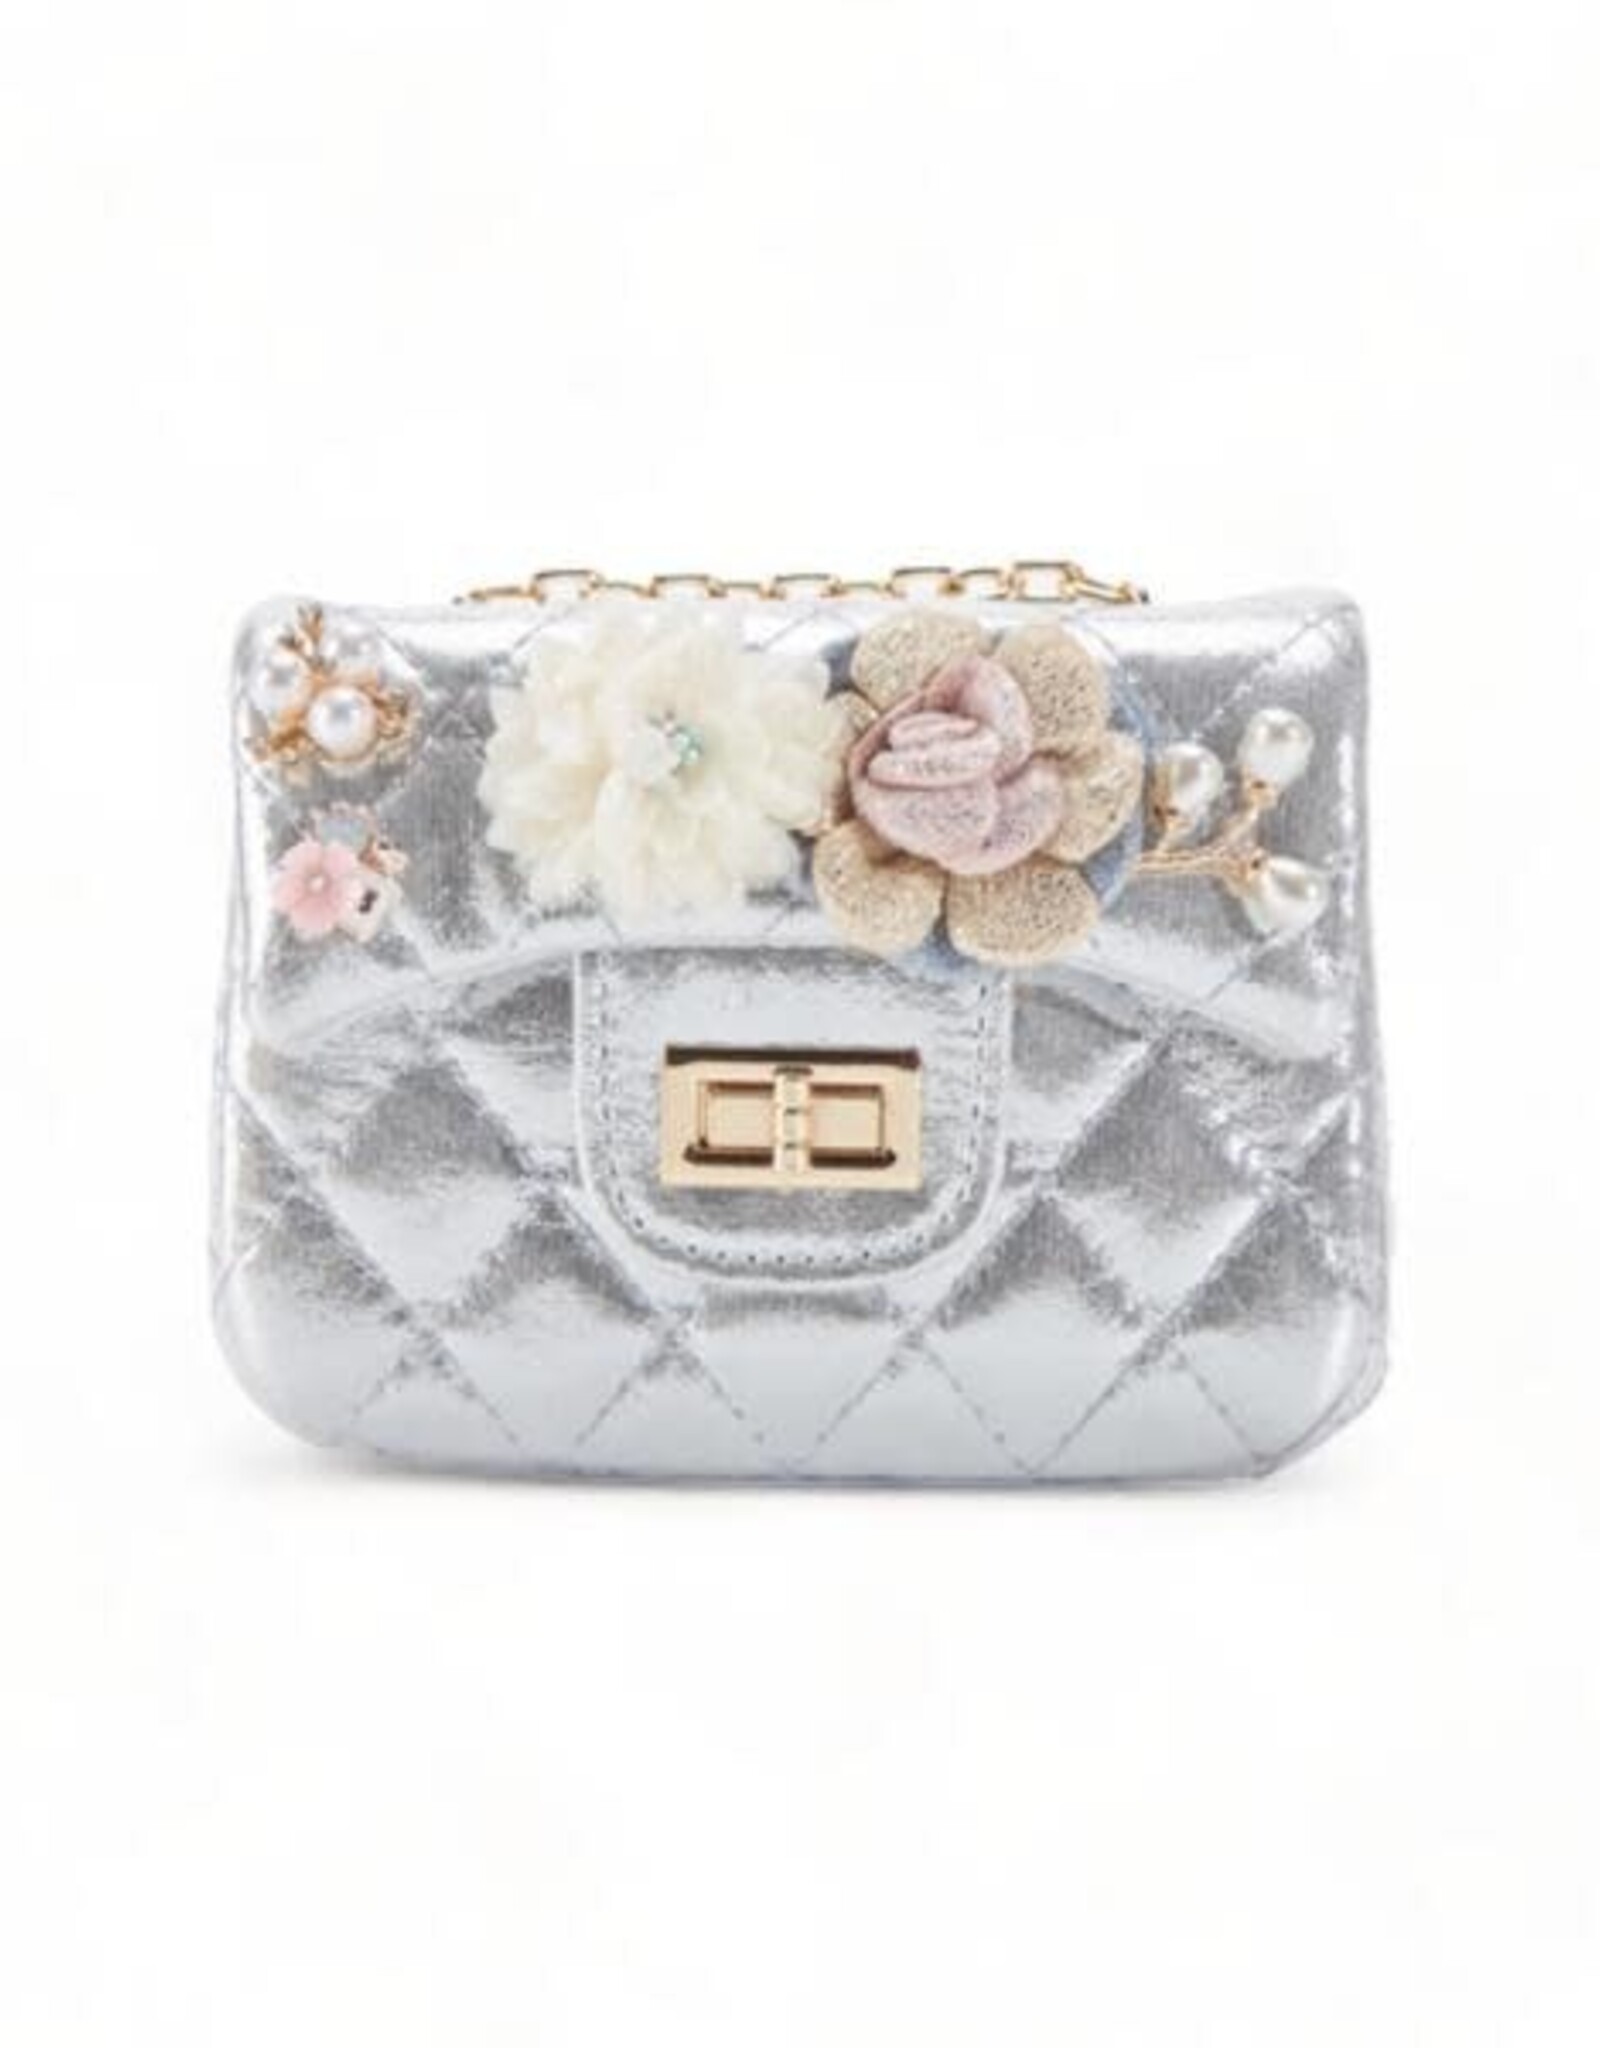 Girls' Floral Appliques Metallic Quilted Purse